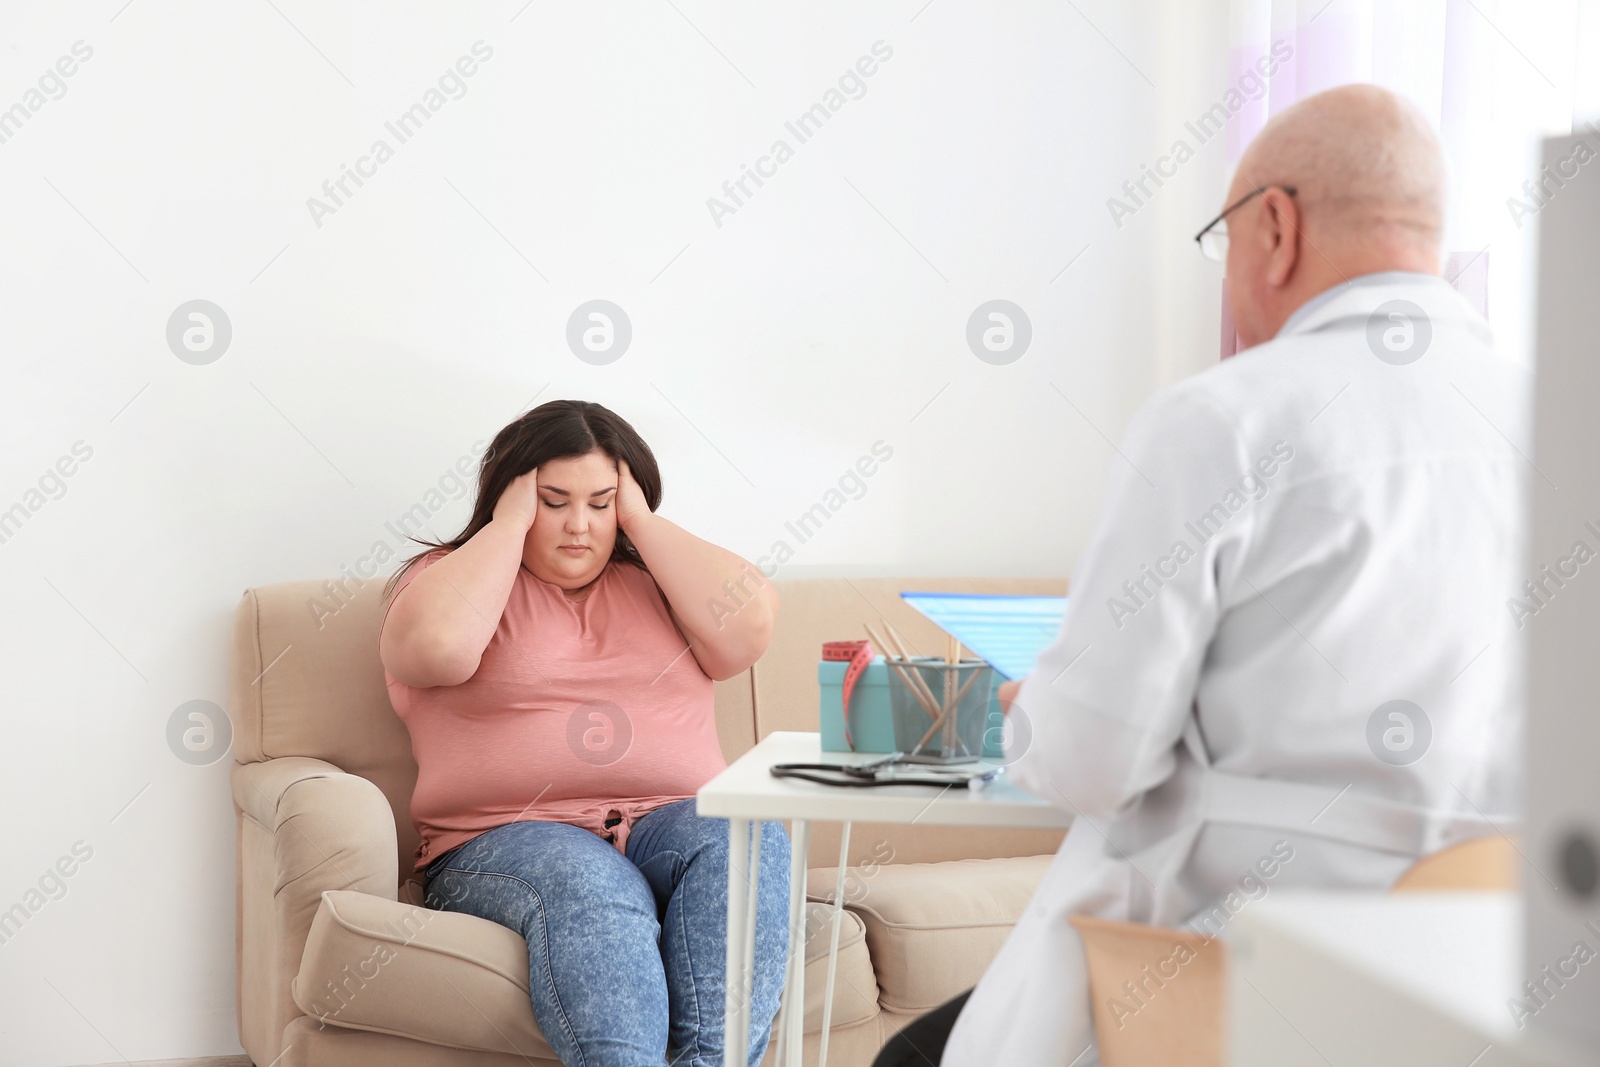 Photo of Emotional overweight woman having consultation at doctor's office